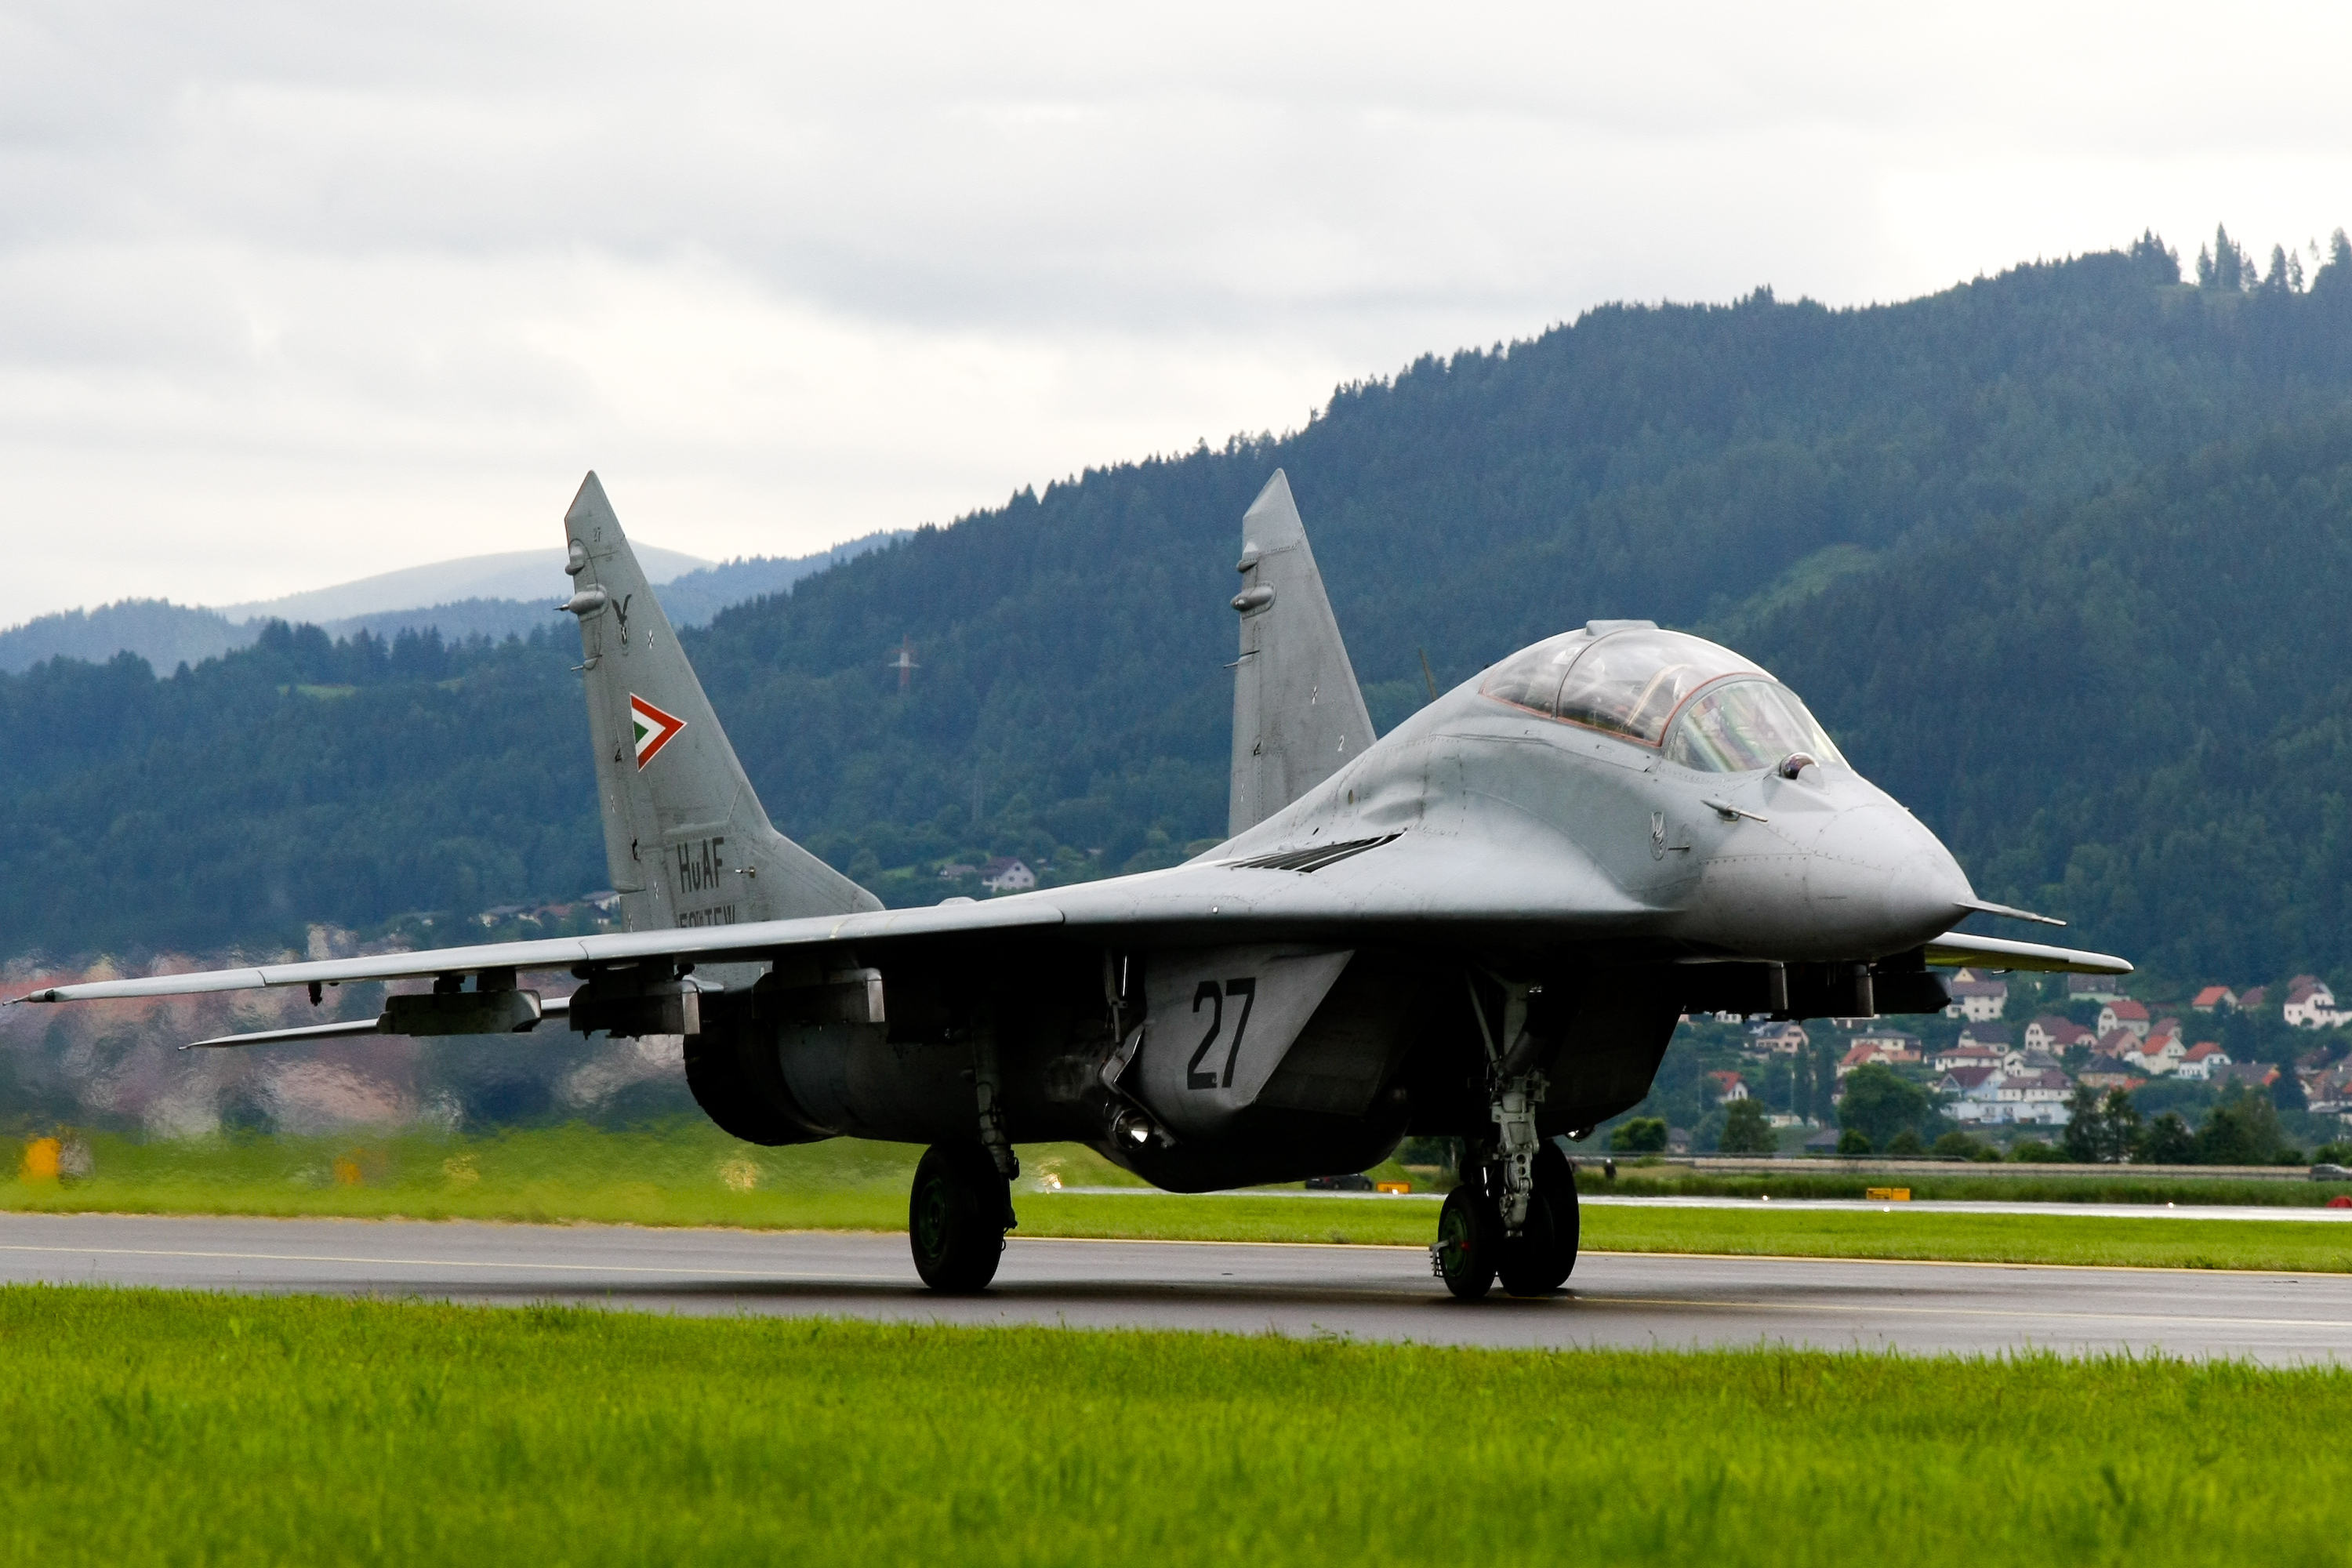 mig_29_fighter_jet_on_the_runway-other.jpg